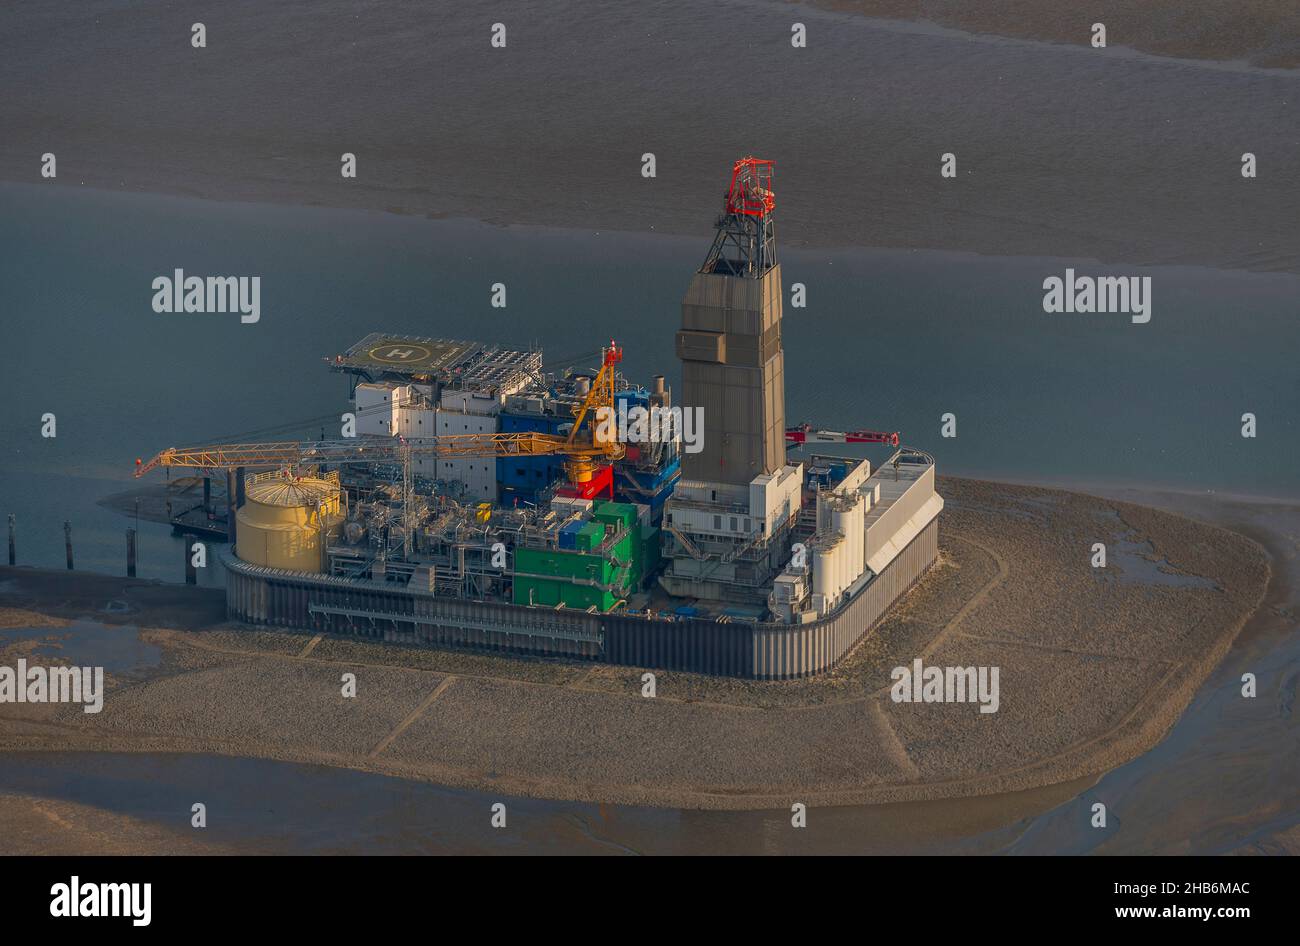 Mittelplate drilling rig in the Wadden Sea National Park, aerial view , Germany, Schleswig-Holstein, Schleswig-Holstein Wadden Sea National Park Stock Photo